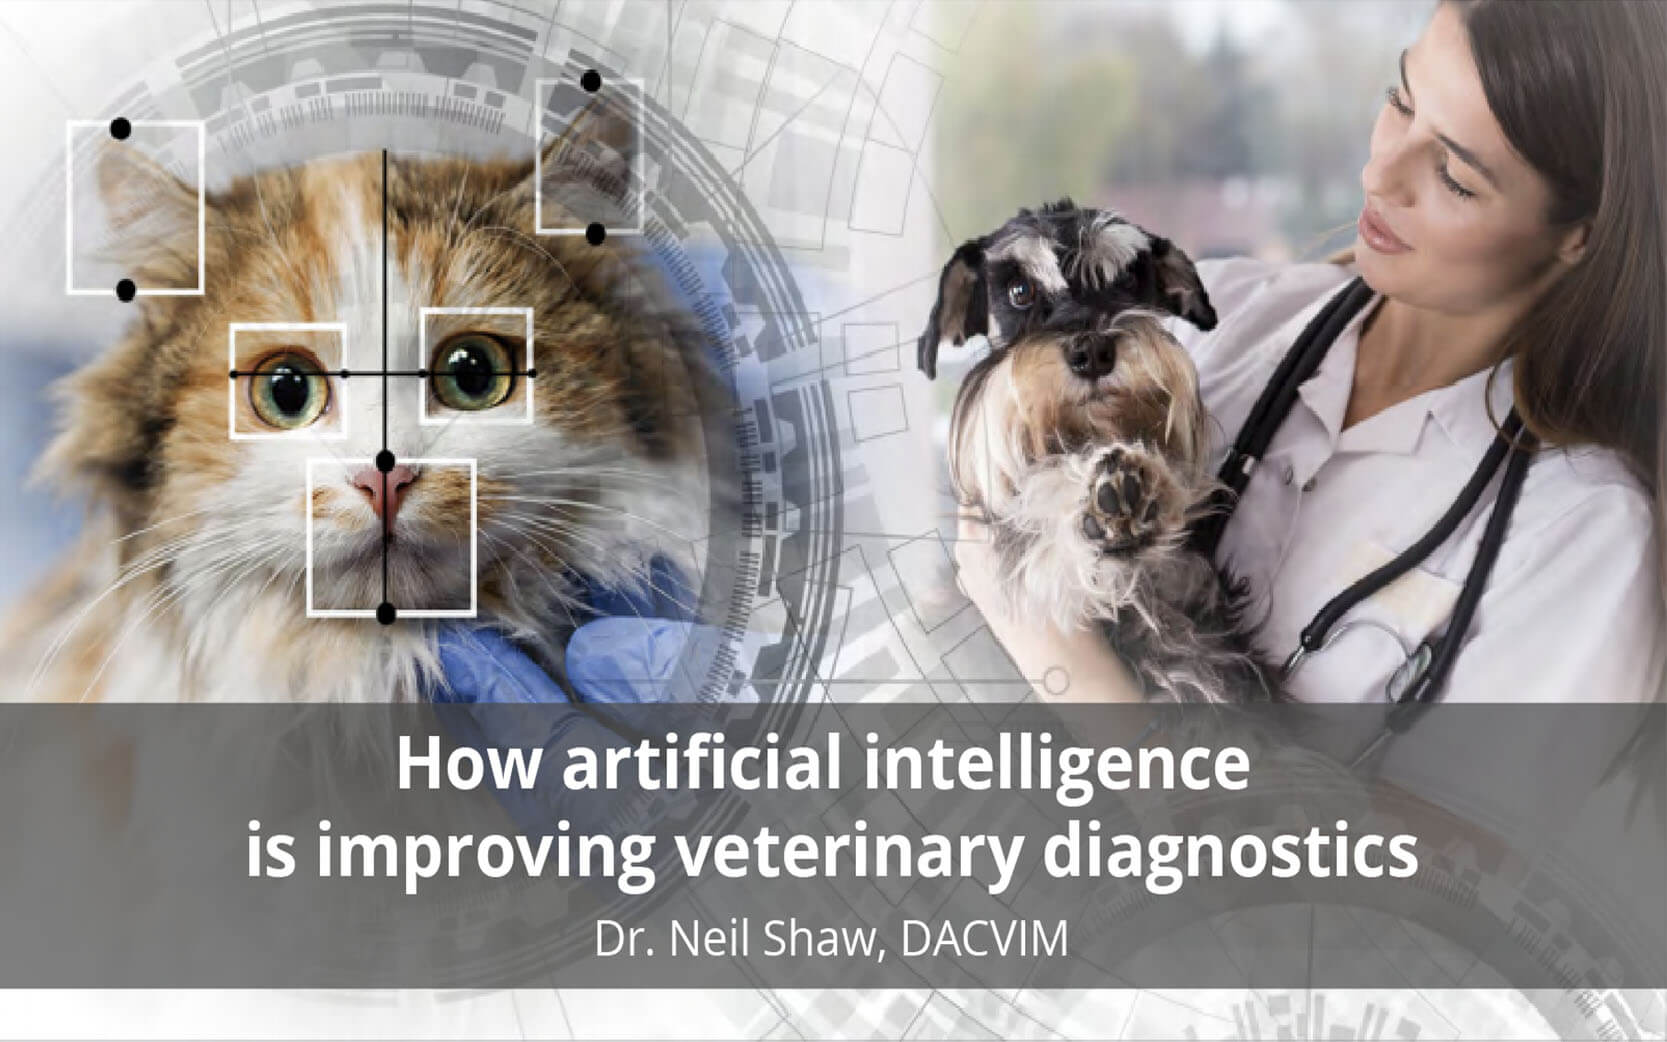 In the News: How artificial intelligence is improving veterinary diagnostics